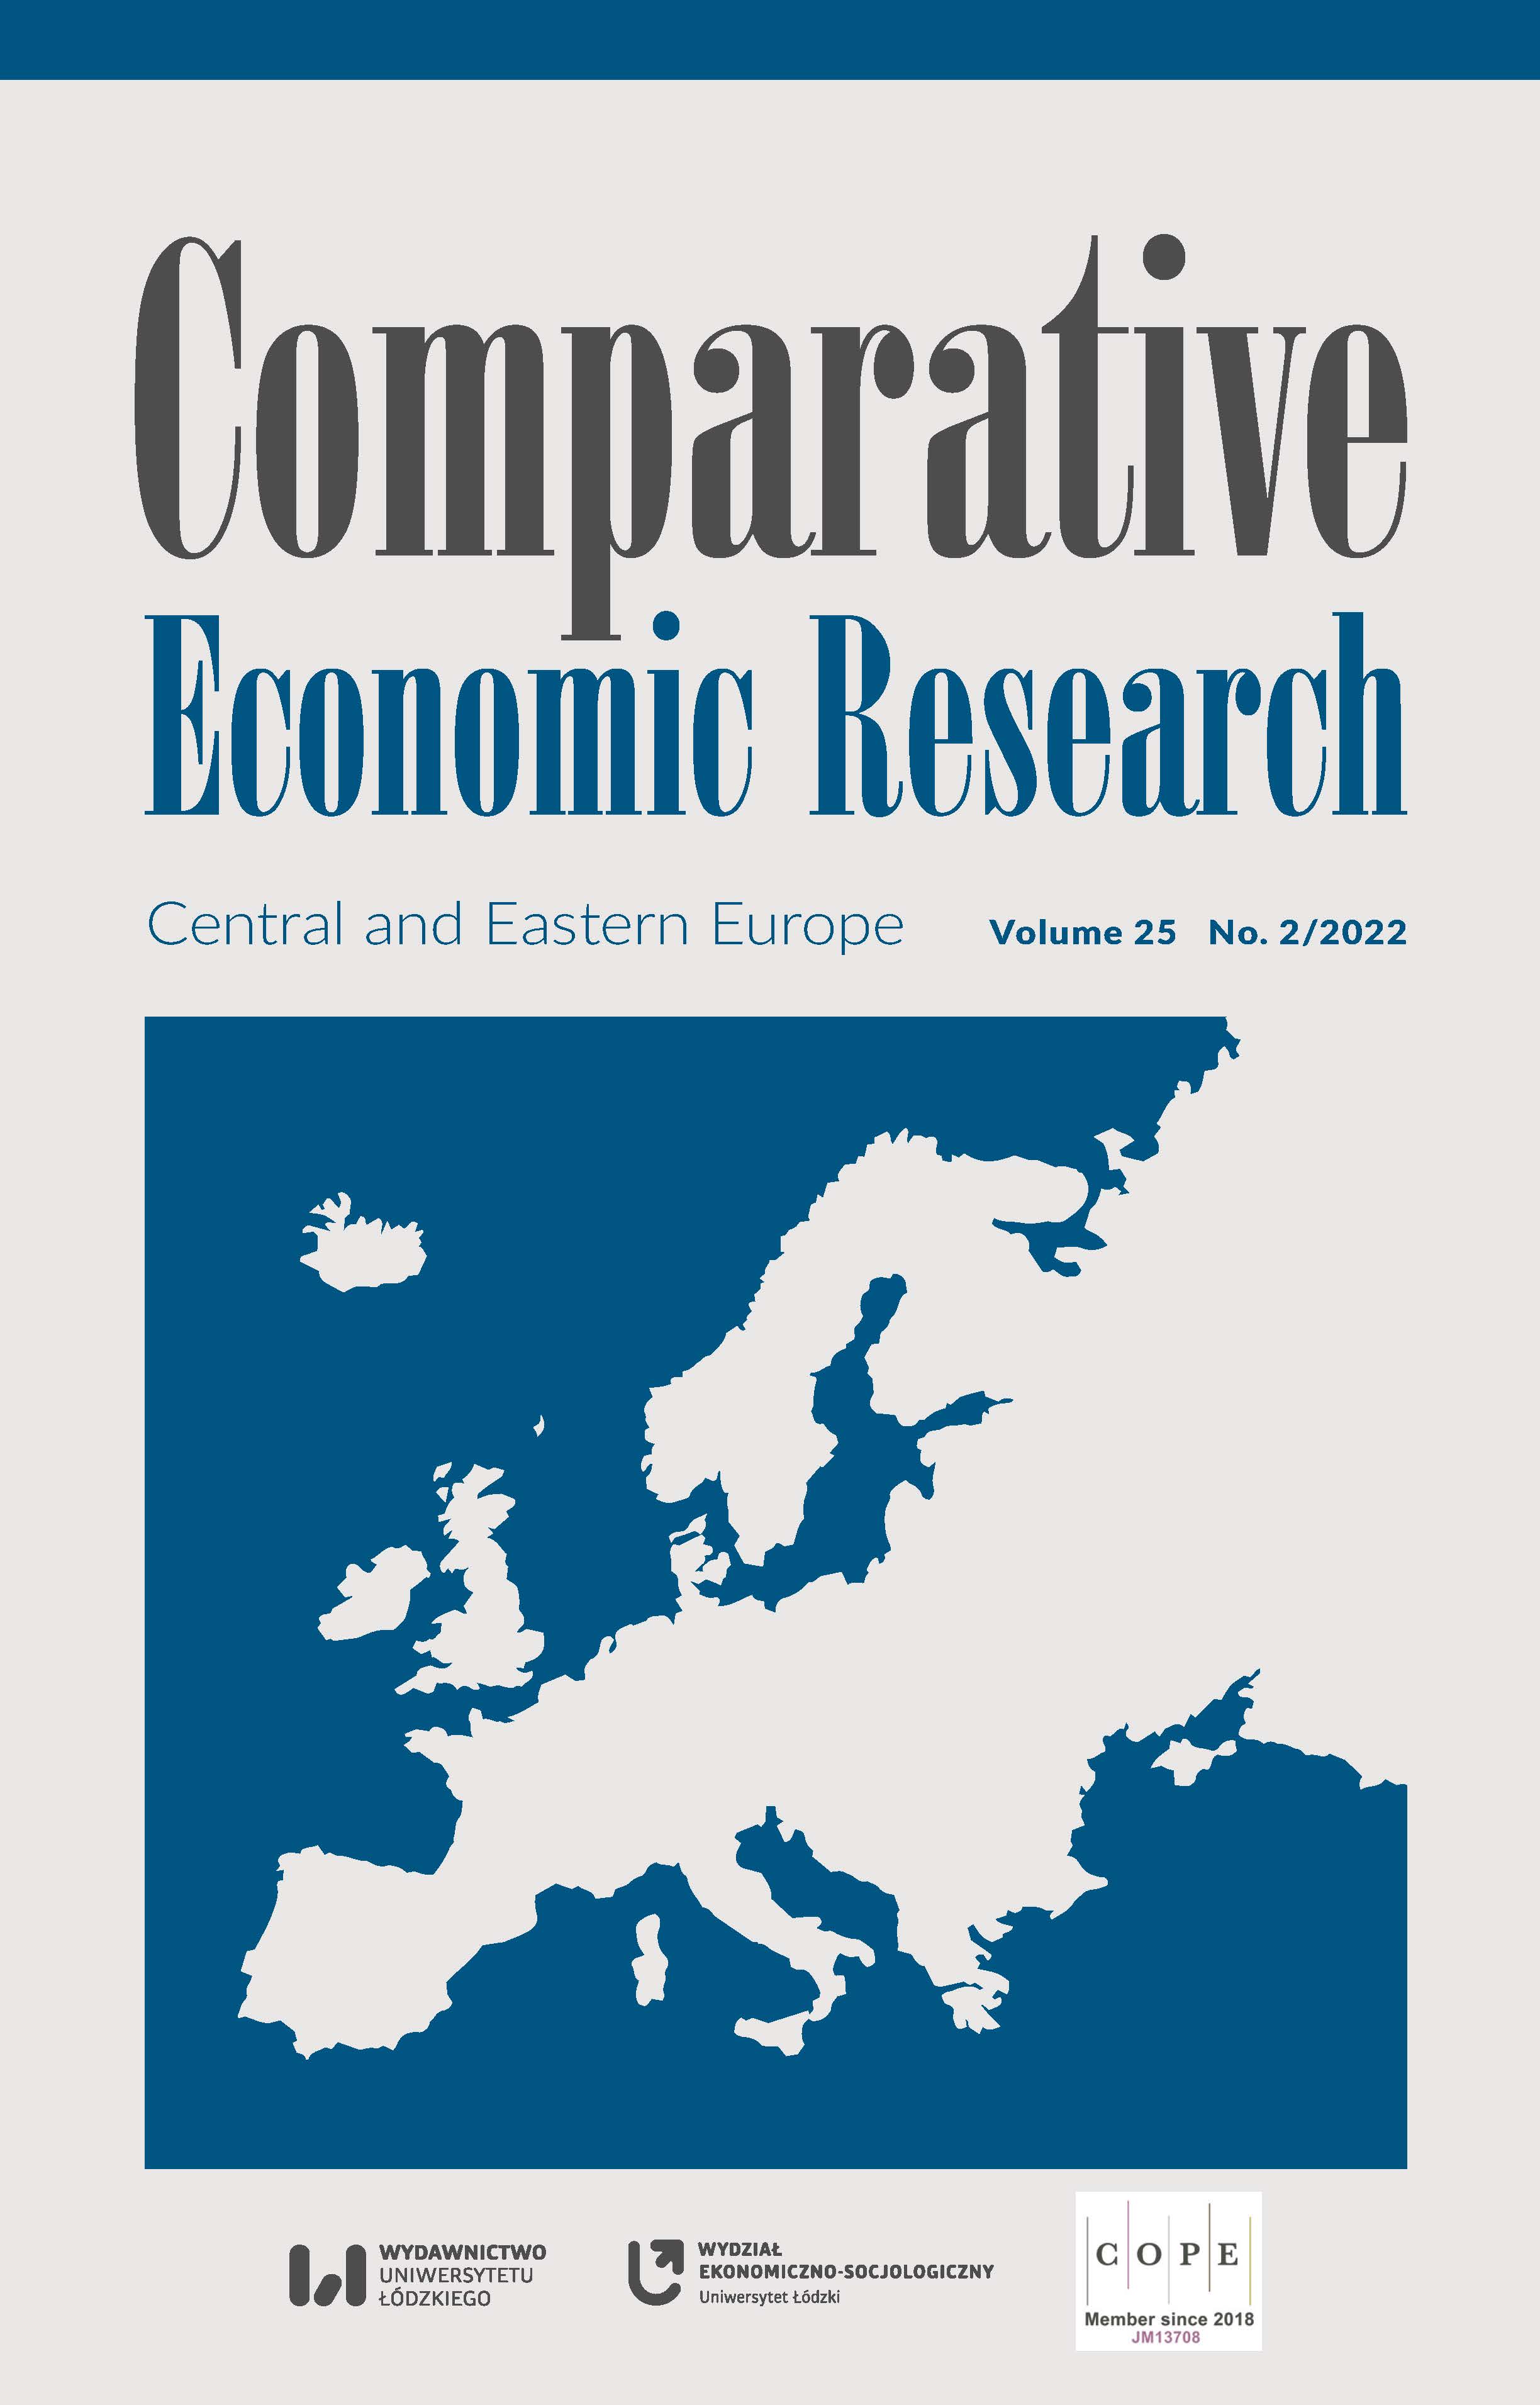 The Bayesian Method in Estimating Polish and German Industry Betas. A Comparative Analysis of the Risk between the Main Economic Sectors from 2001–2020